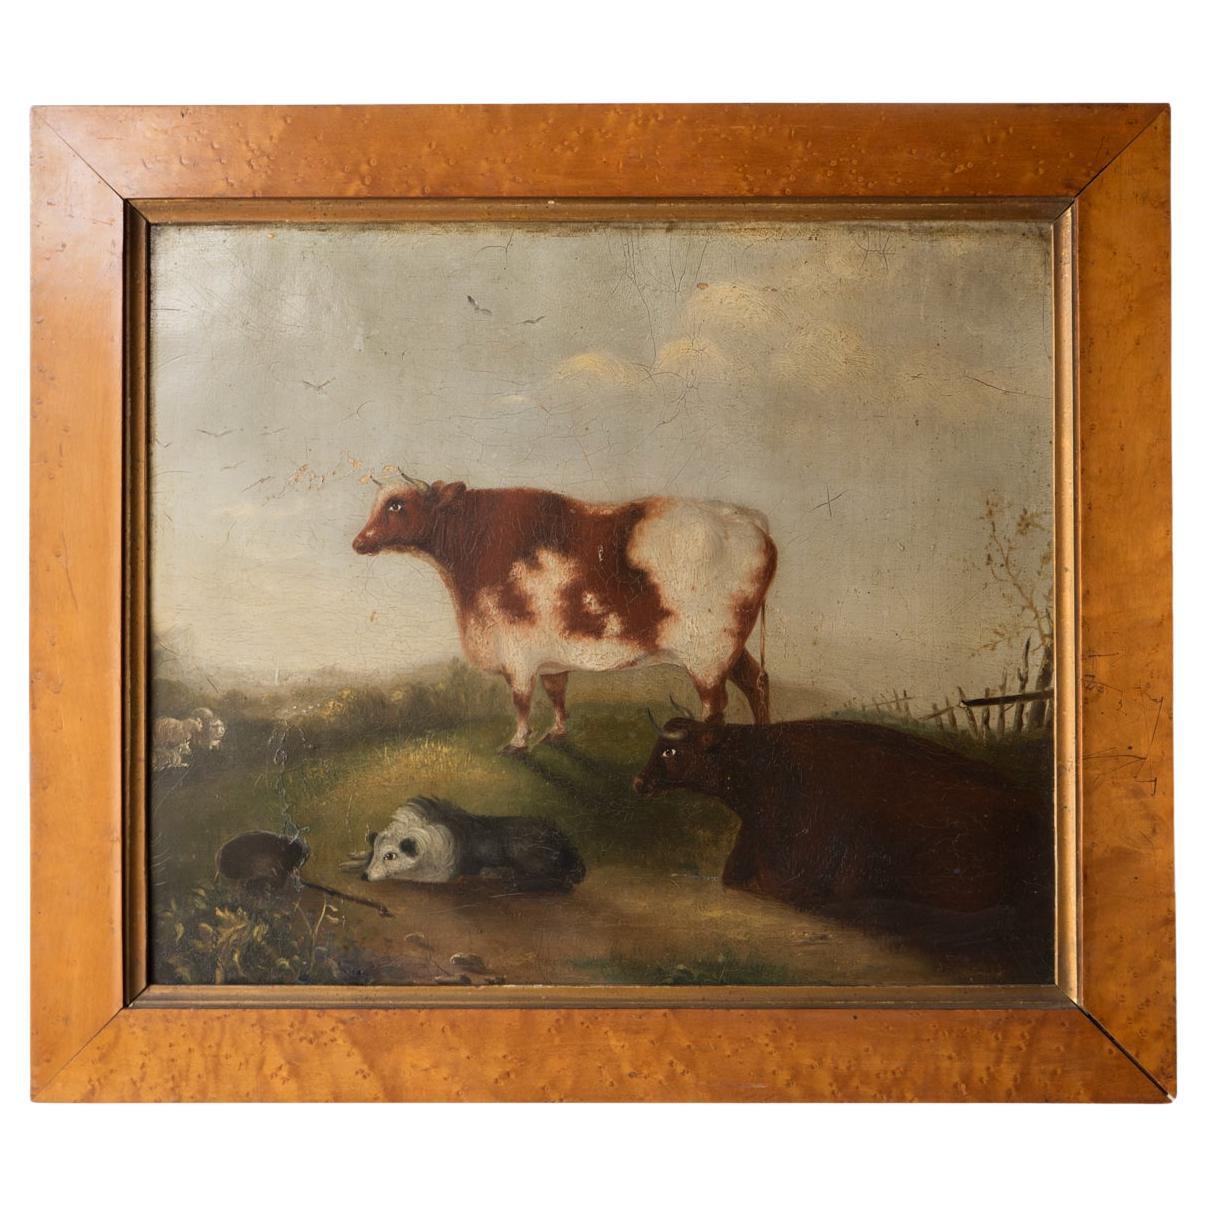 Naive Folk Art Depiction of Cattle, Sheep & Sheepdog, Antique Oil Painting